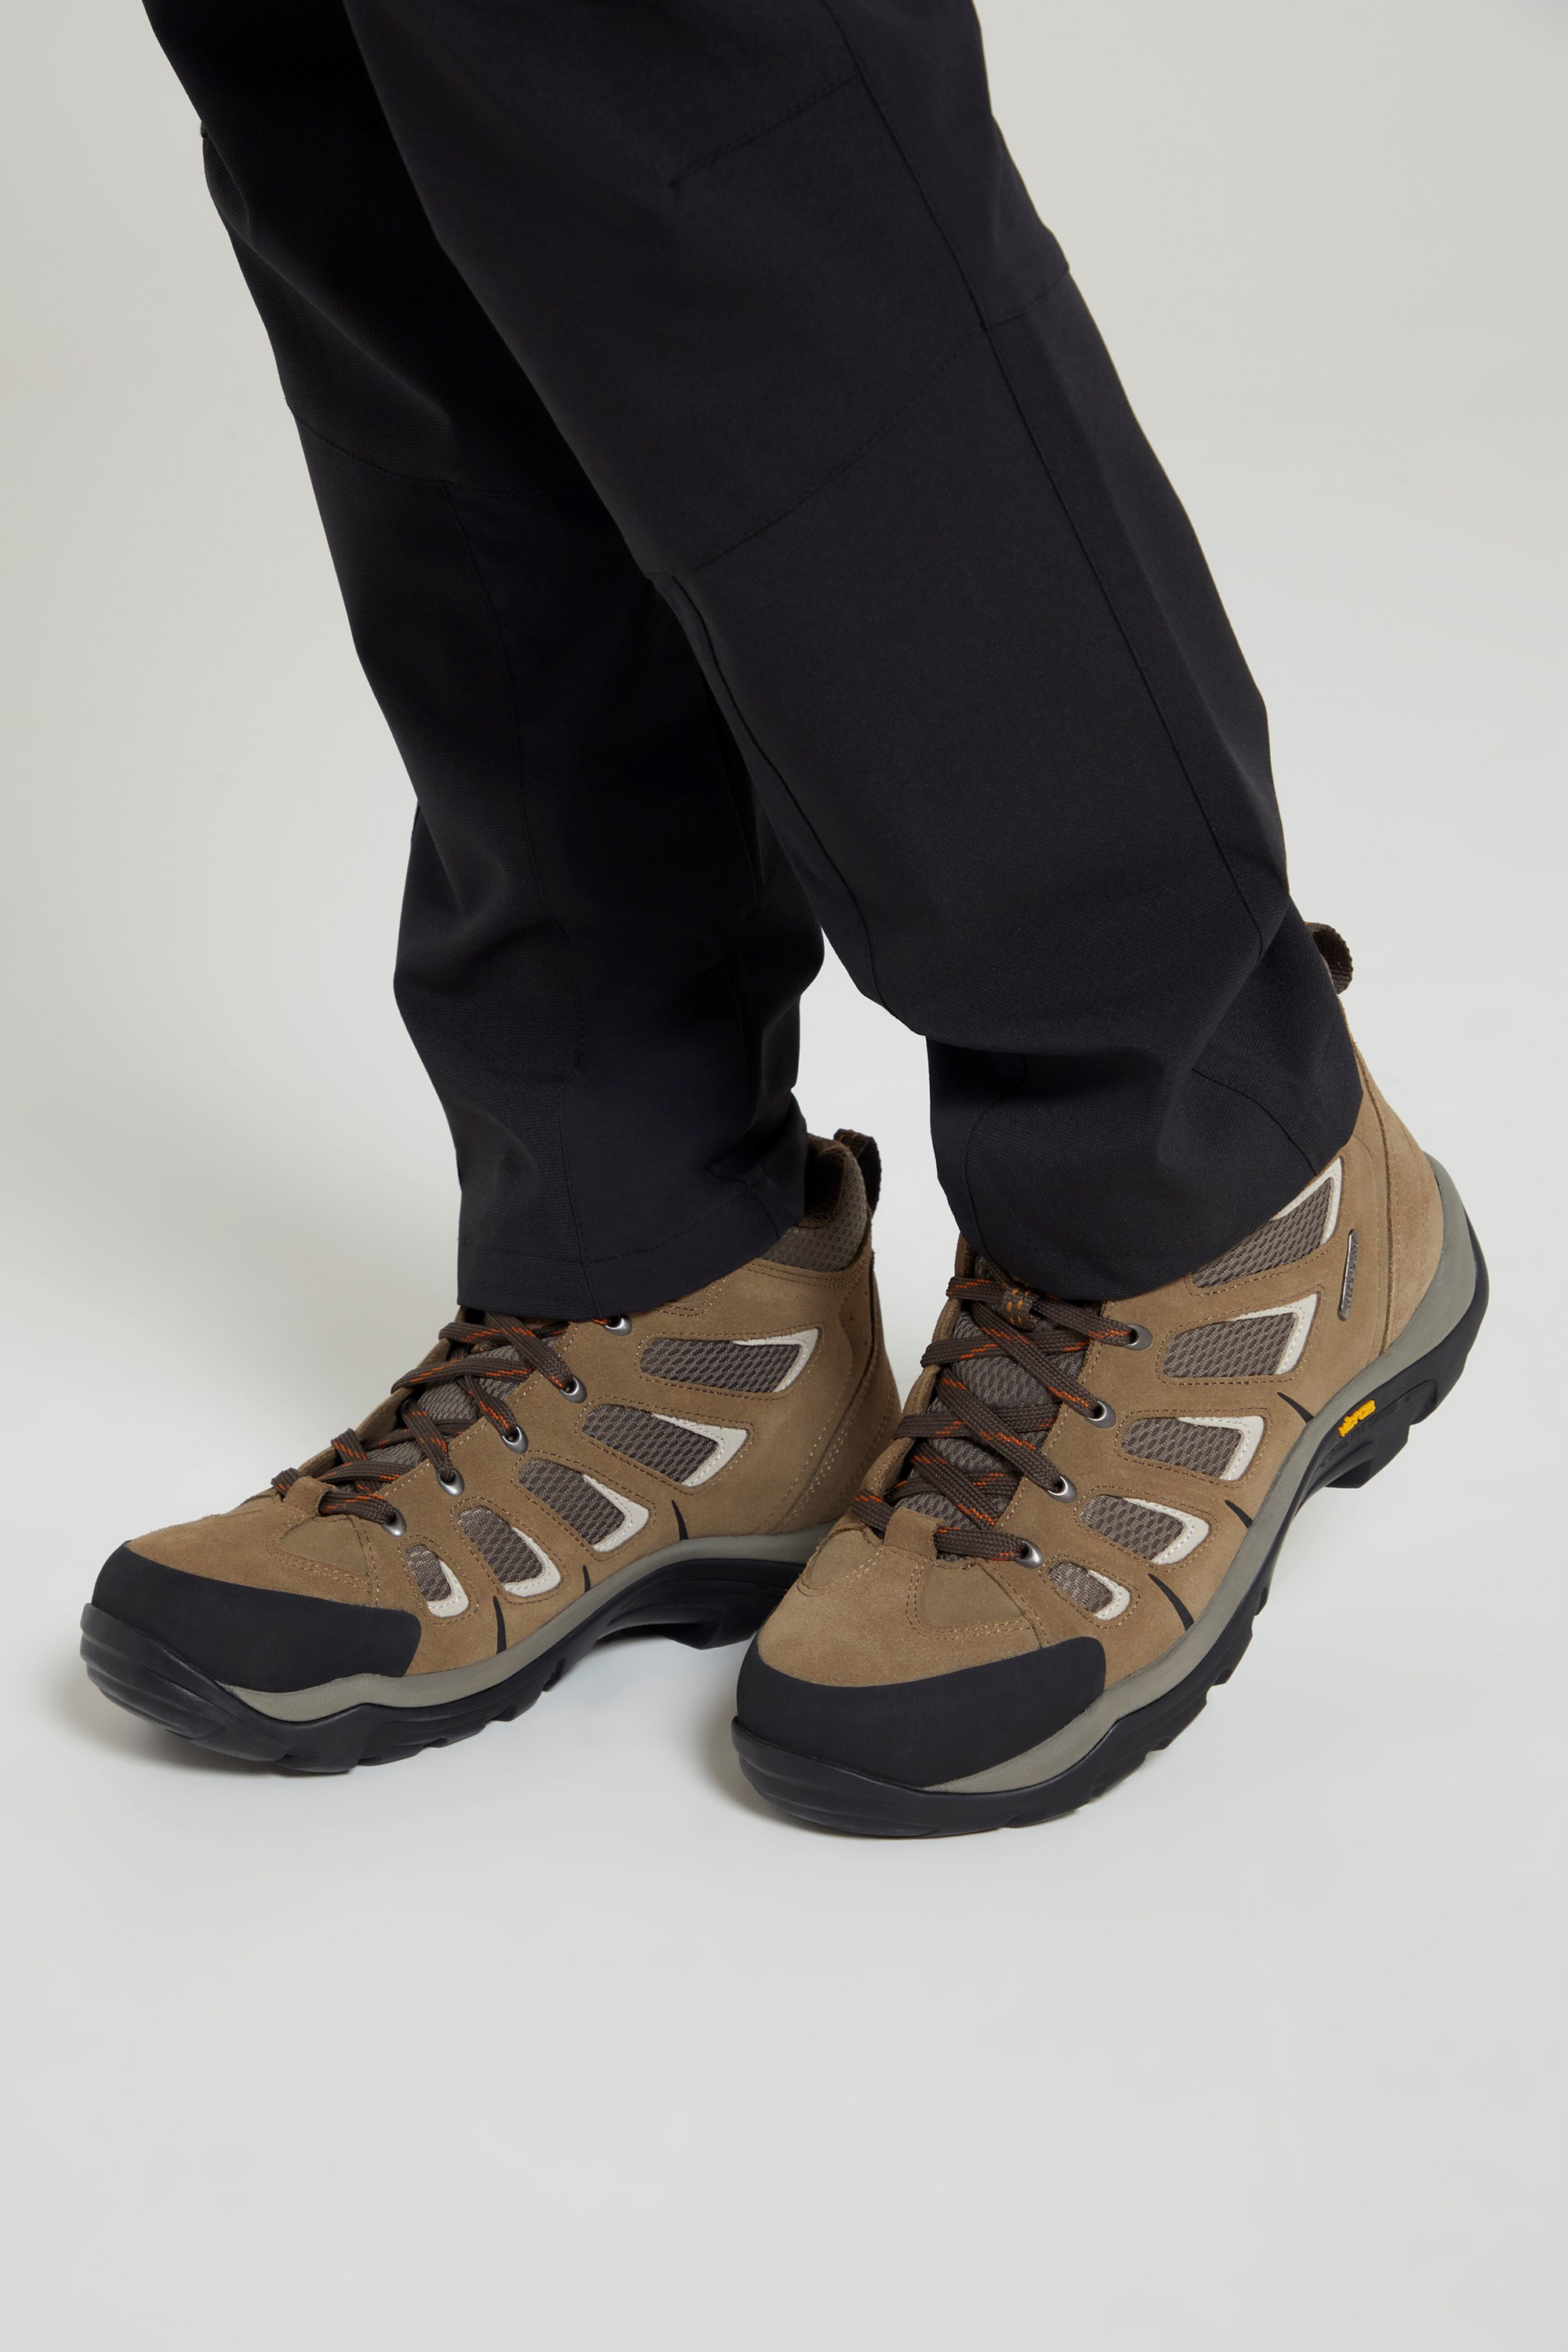 Field Extreme Mens Wide-Fit Vibram Waterproof Boots | Mountain Warehouse GB